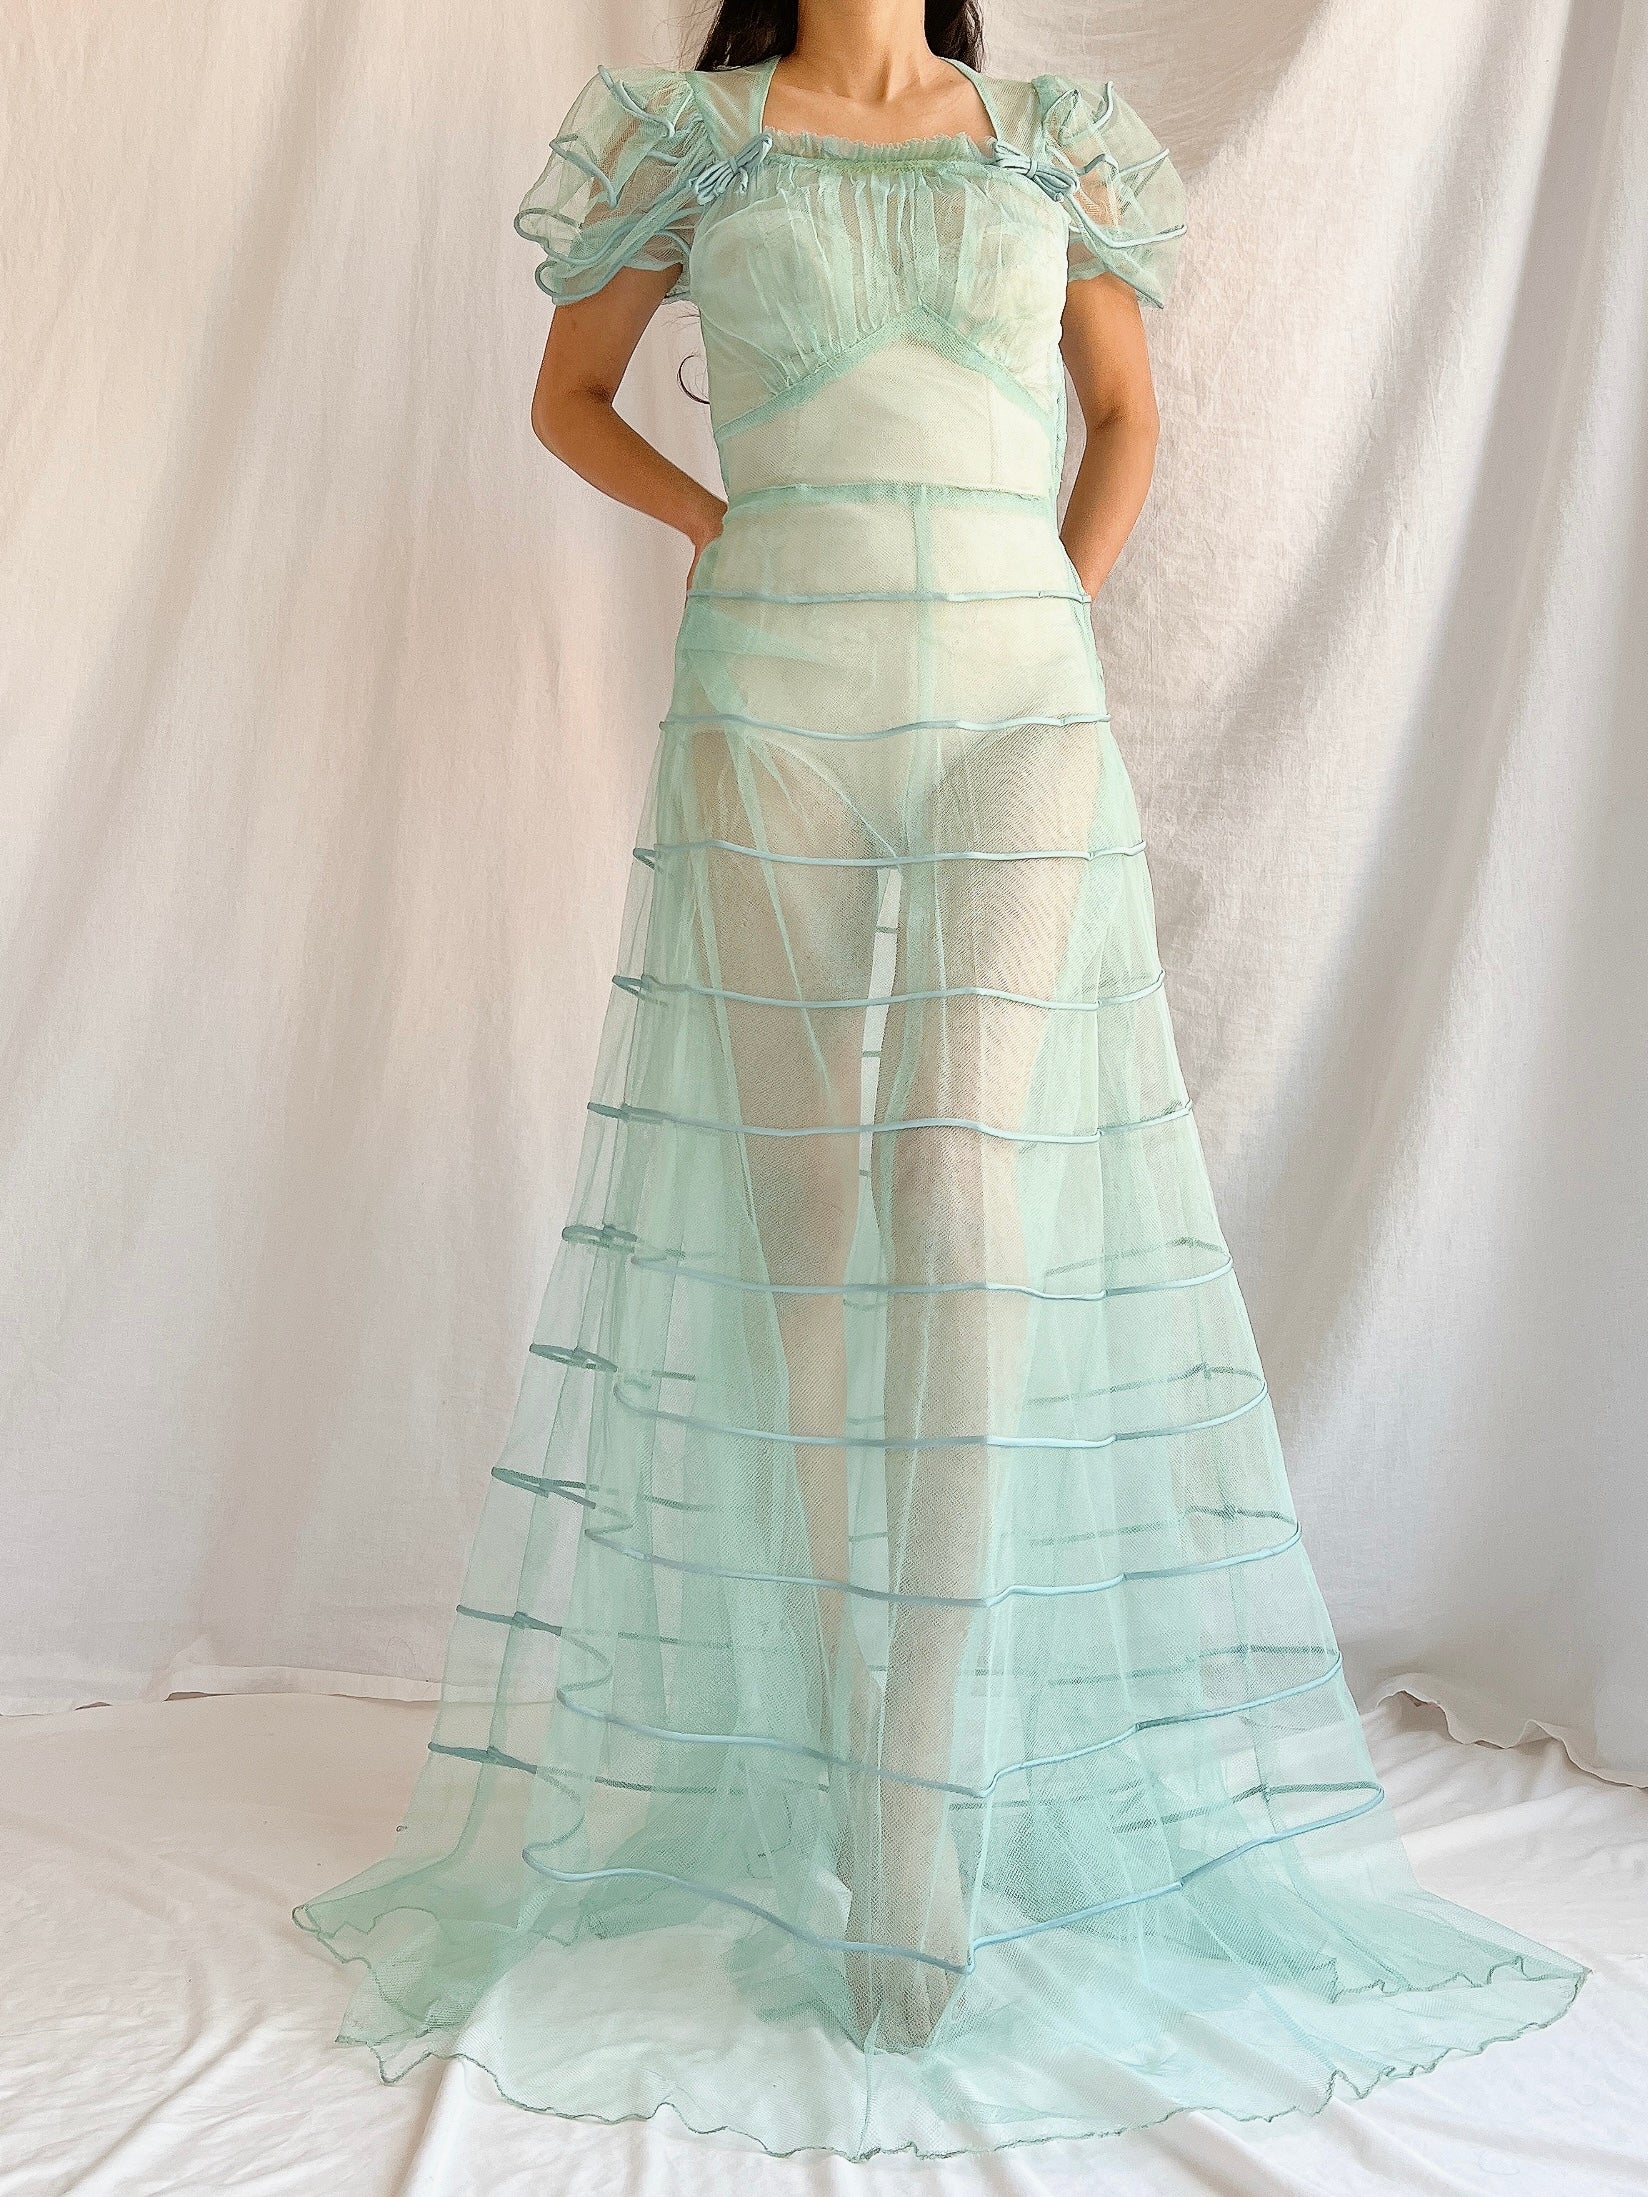 1930s Turquoise Tulle Dress - XS